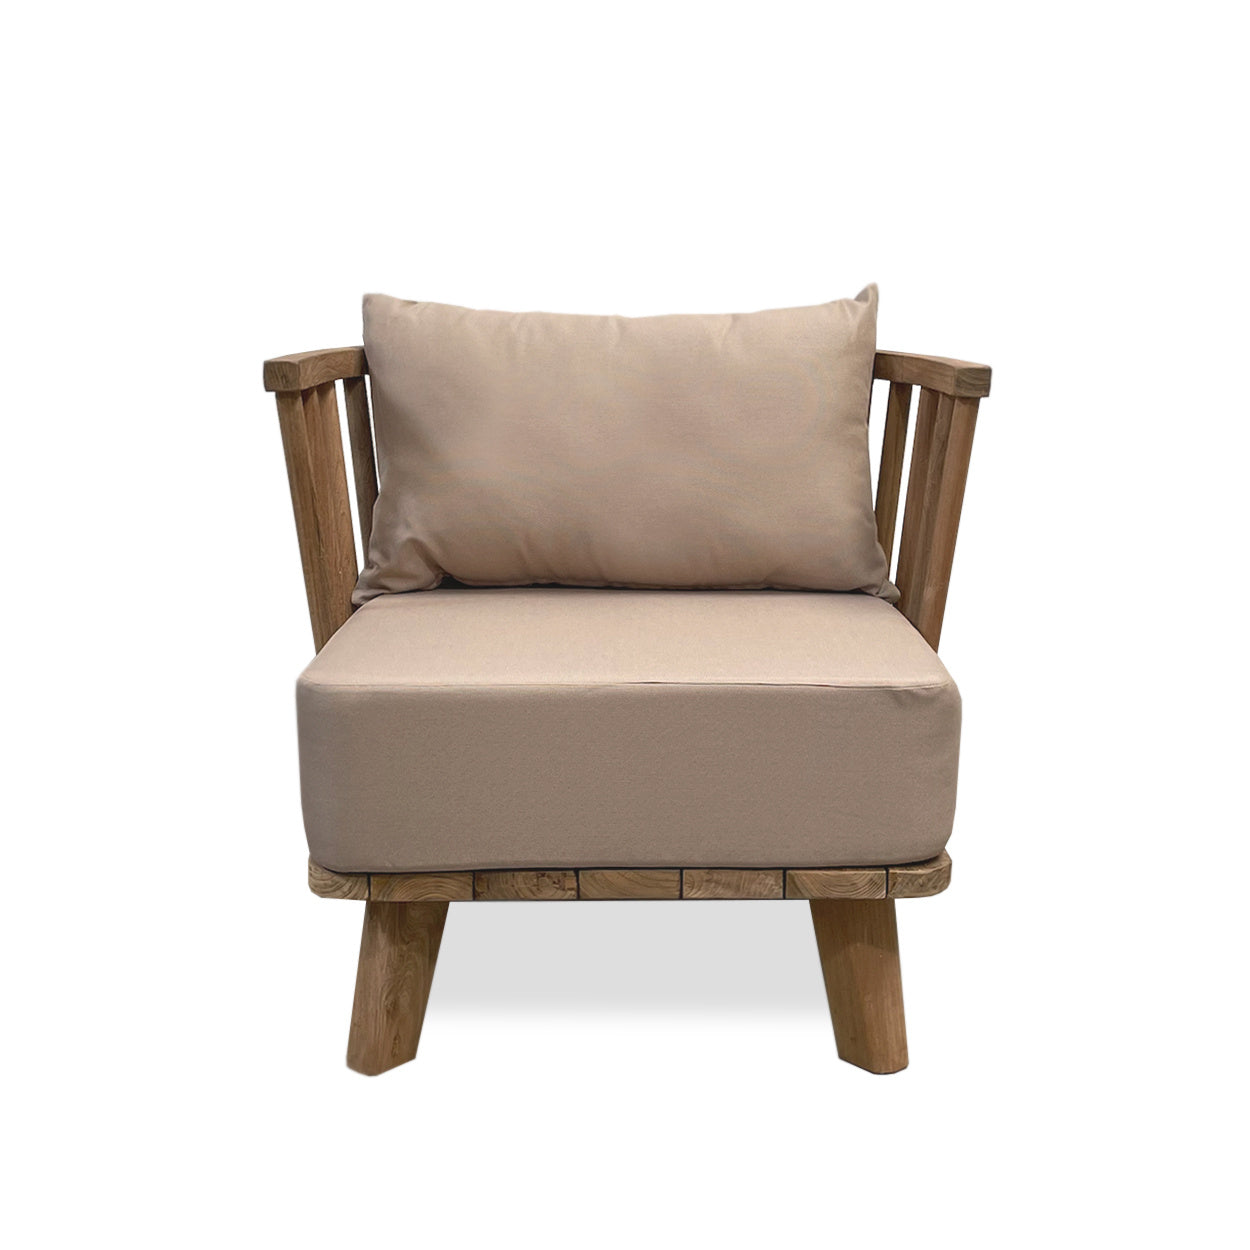 THE MALAWI Chaise une place - Naturel Beige